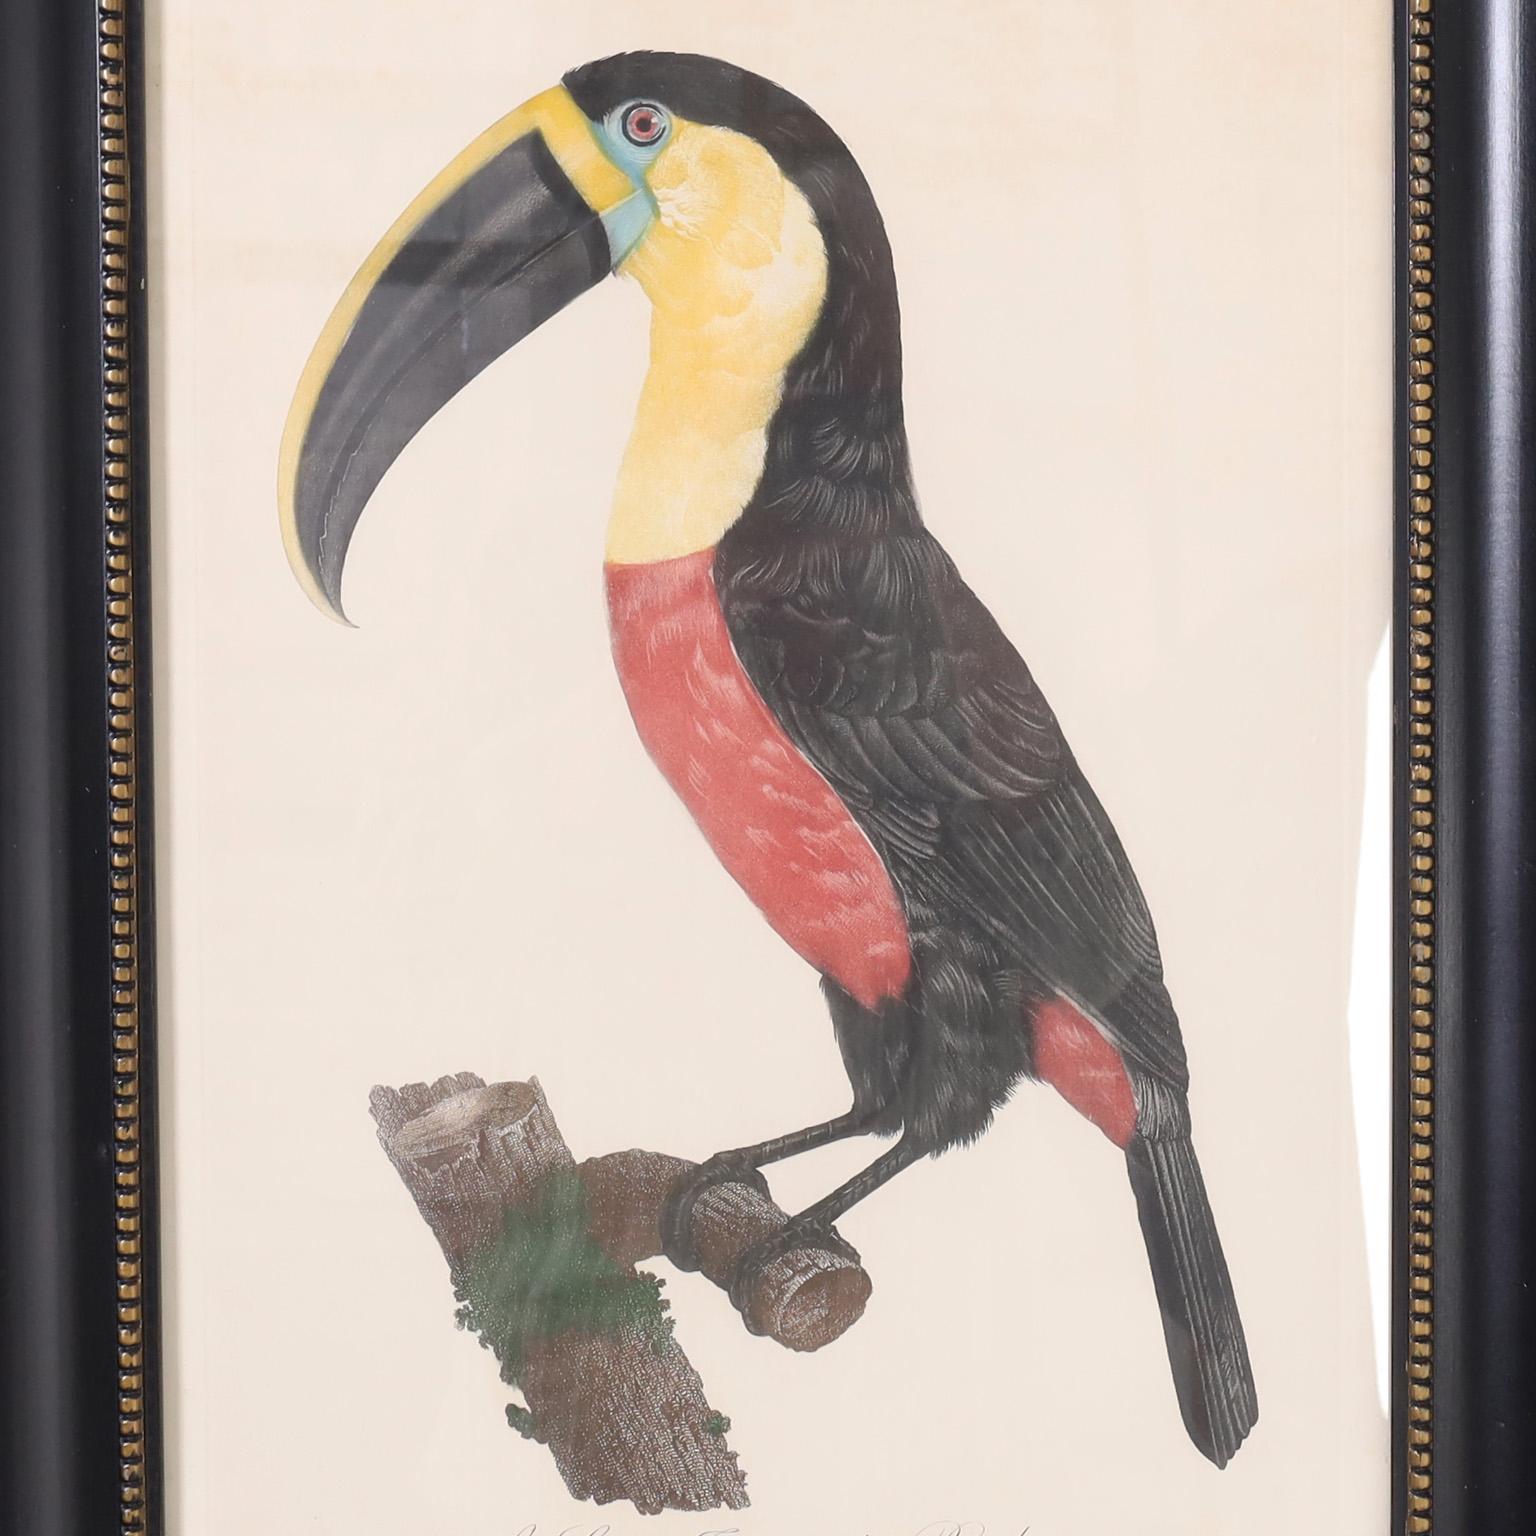 Striking 19th century engraving of a toucan hand colored by artist and naturalist Jacques Barraband (1767-1809 ) first published in Paris 1801. Presented under glass in a lacquered wood frame with beaded highlights.